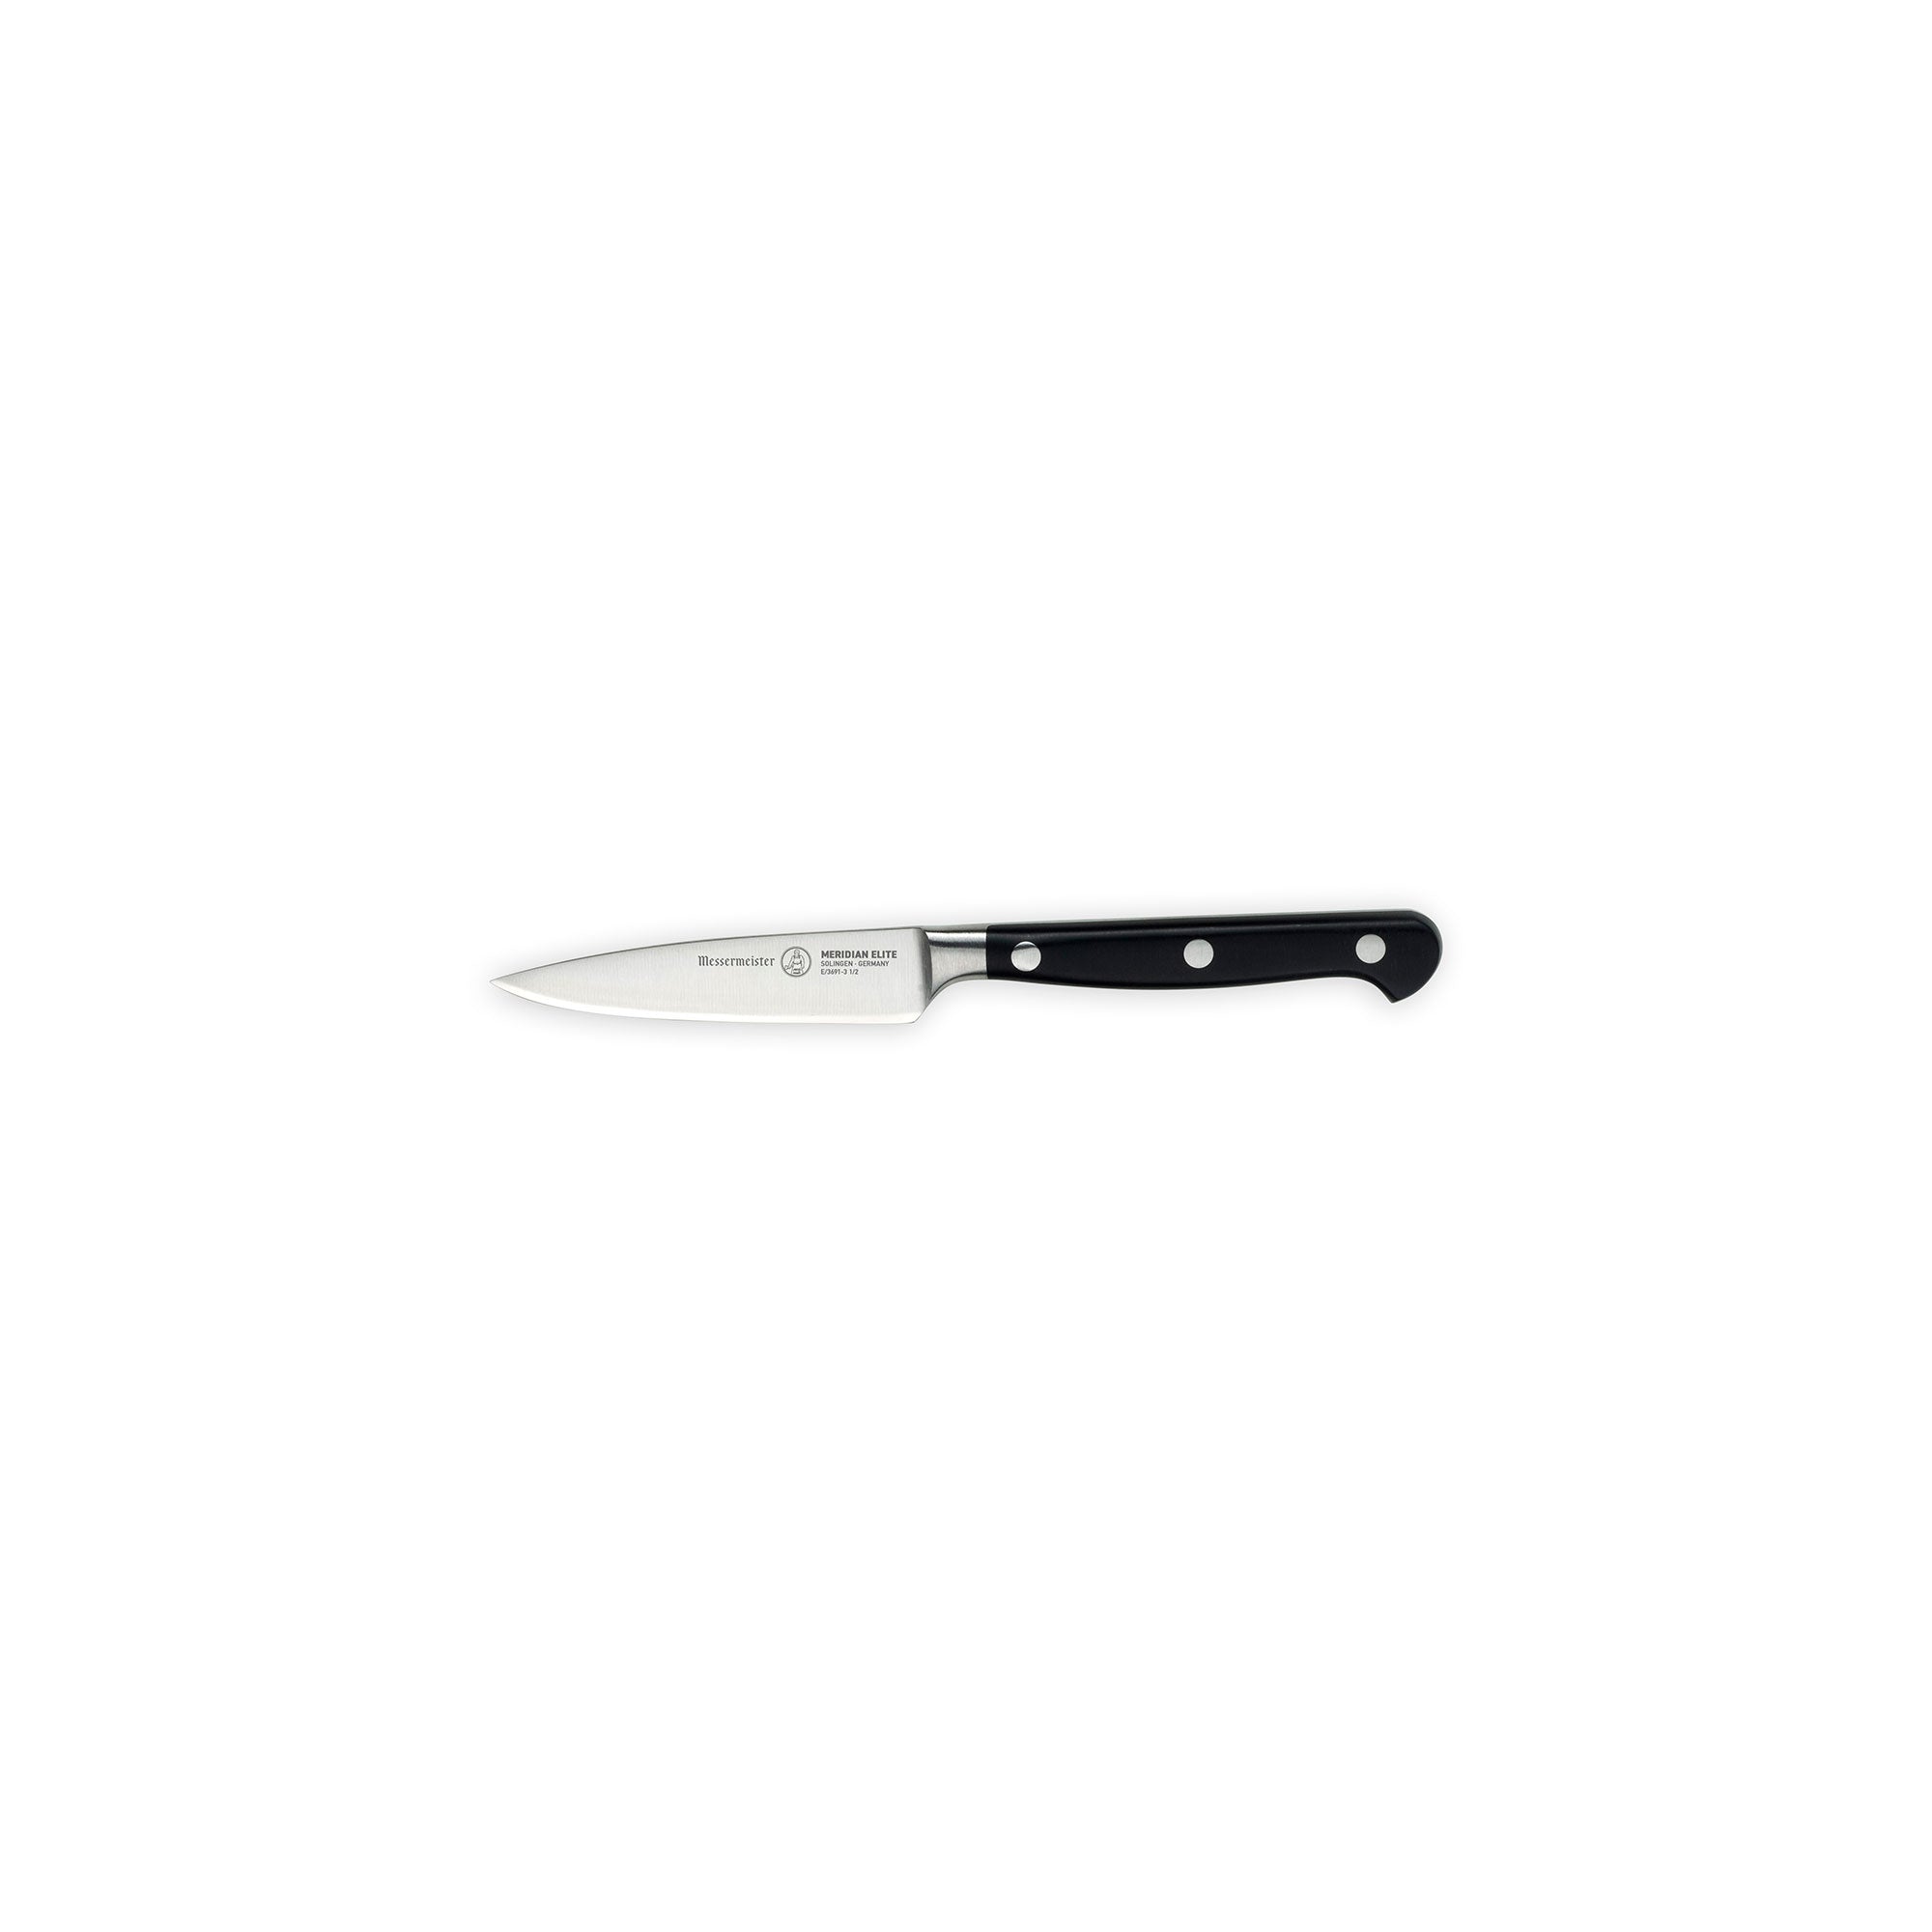 Messermeister 3 Clip Point Paring Knife with Sheath - Orange